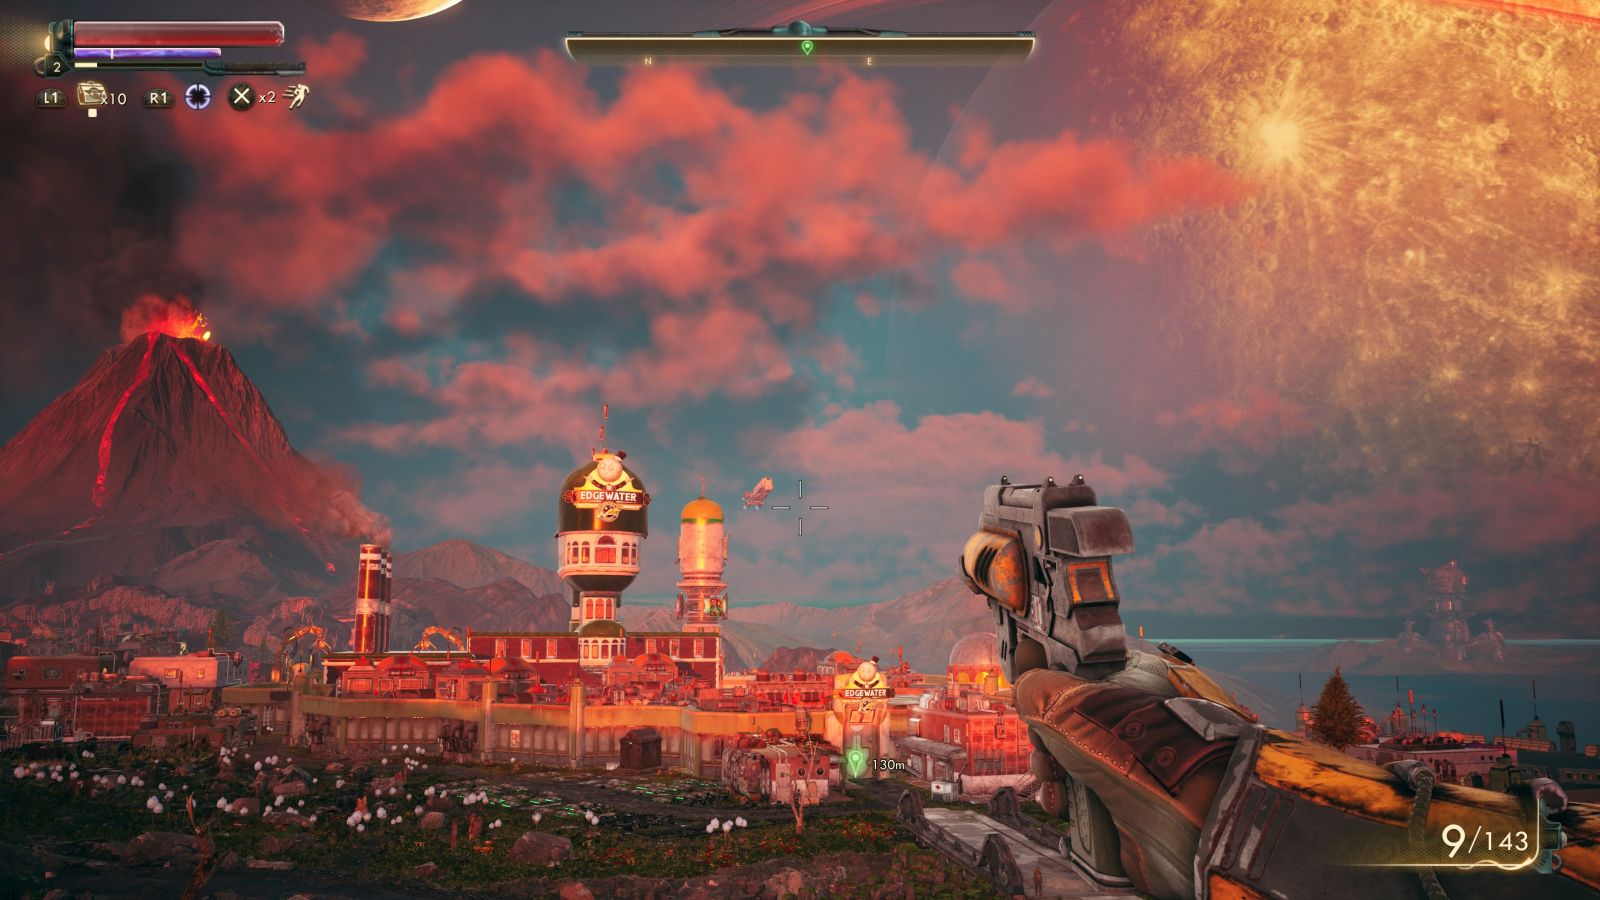 The Outer Worlds: Spacer's Choice Edition Review – Nothing Of Note